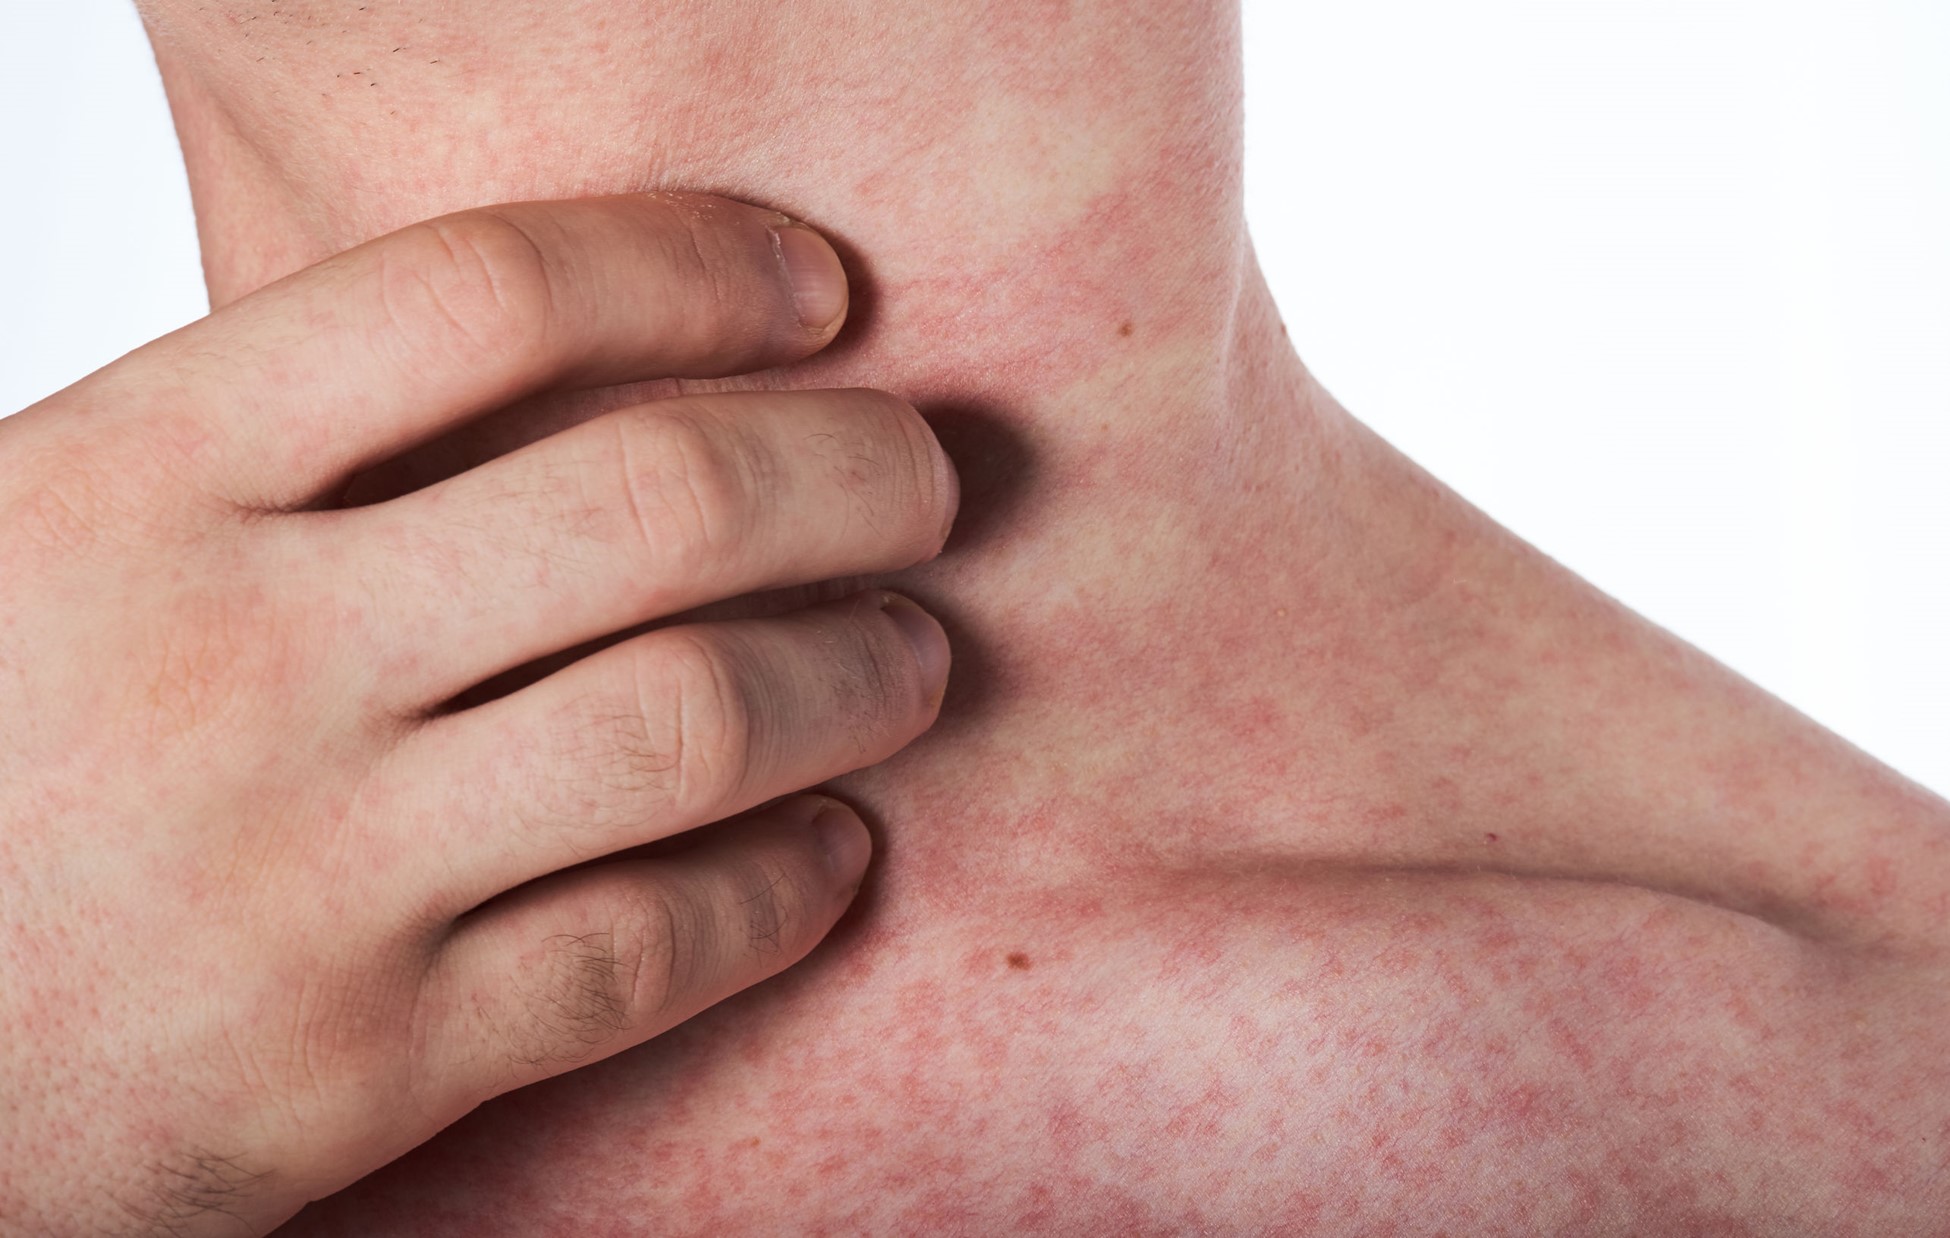 Skin Rashes is a Sign of Chronic Inflammation